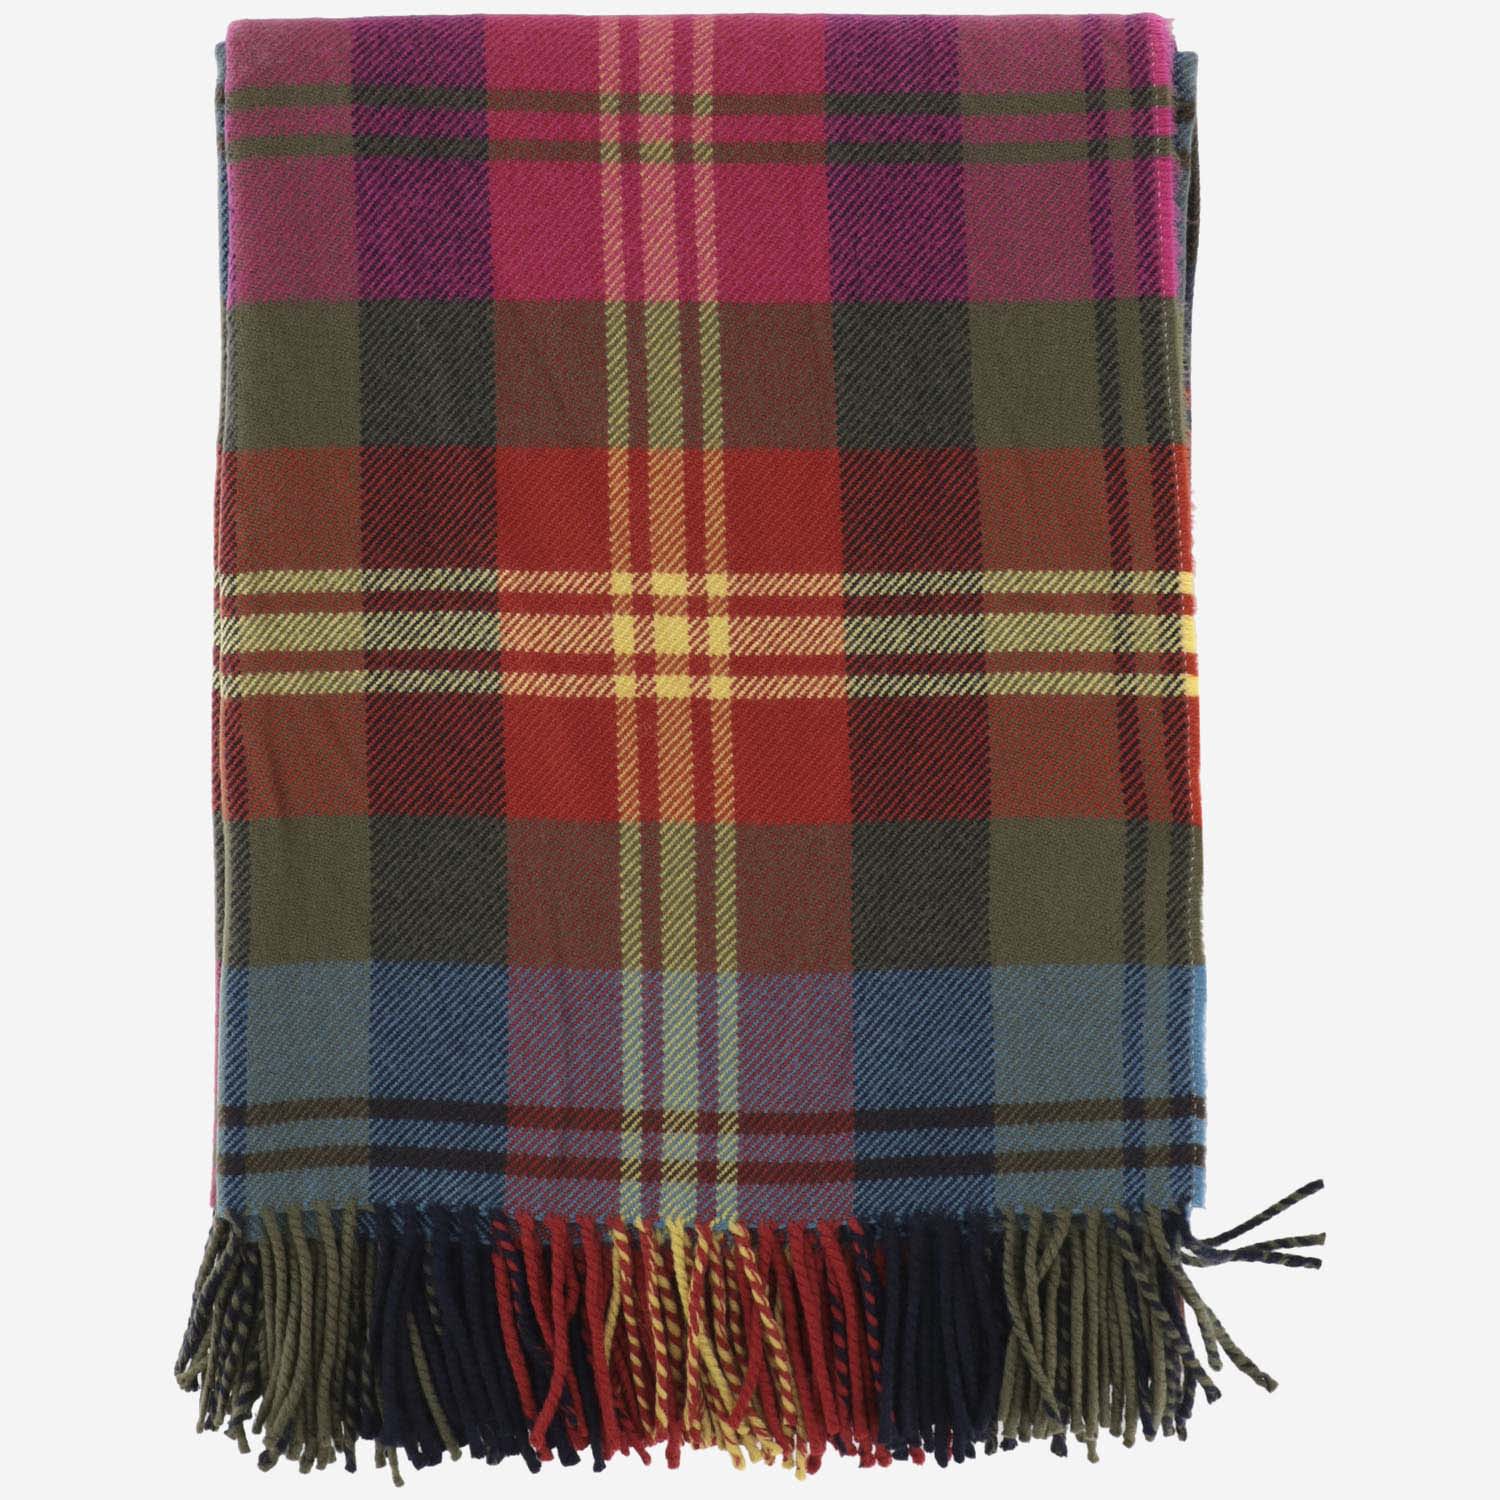 ETRO WOOL SCARF WITH CHECK PATTERN